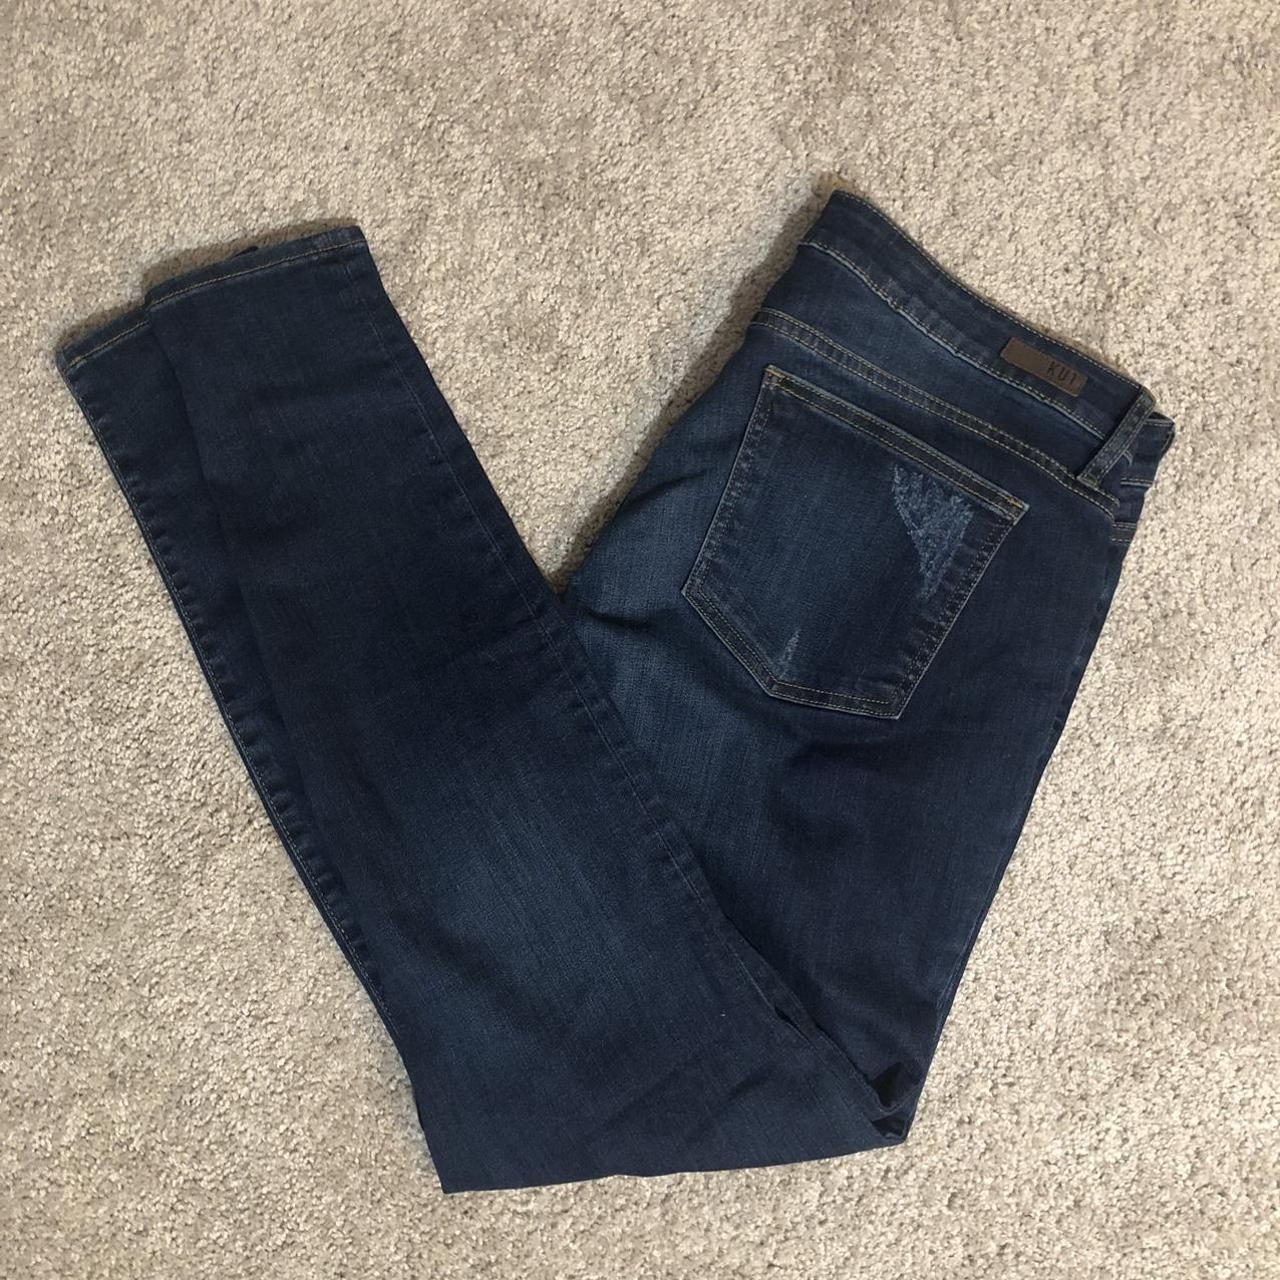 Kut from the Kloth Women's Blue Jeans (2)